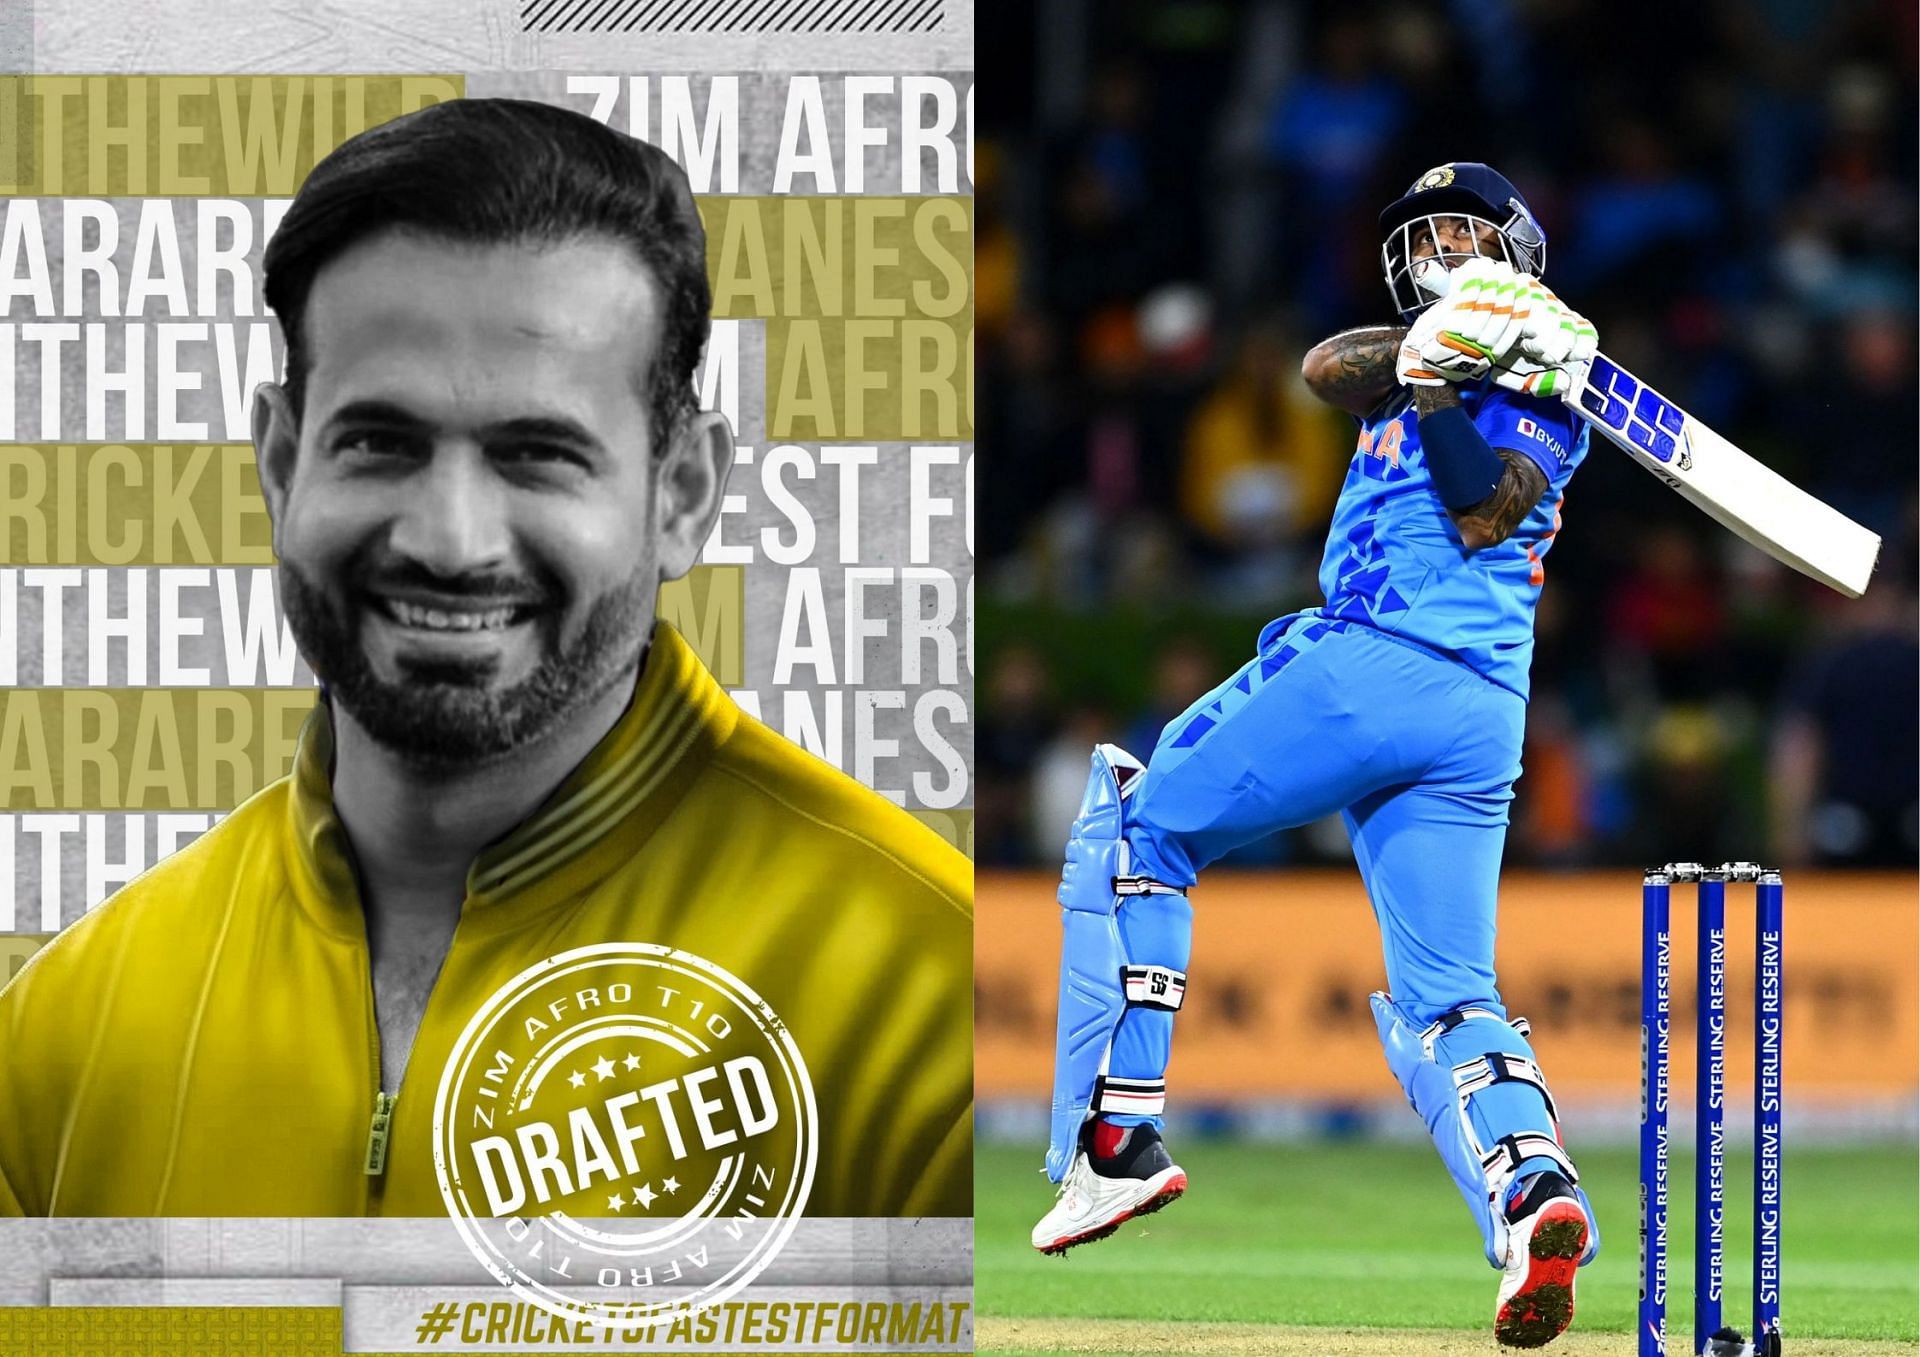 Irfan Pathan was signed up to play in the Zim-Afro T10 League. Suryakumar Yadav (R) would make a great fit himself in a Utopian world (Picture Credits: Twitter/ZimAfroT10; Getty).